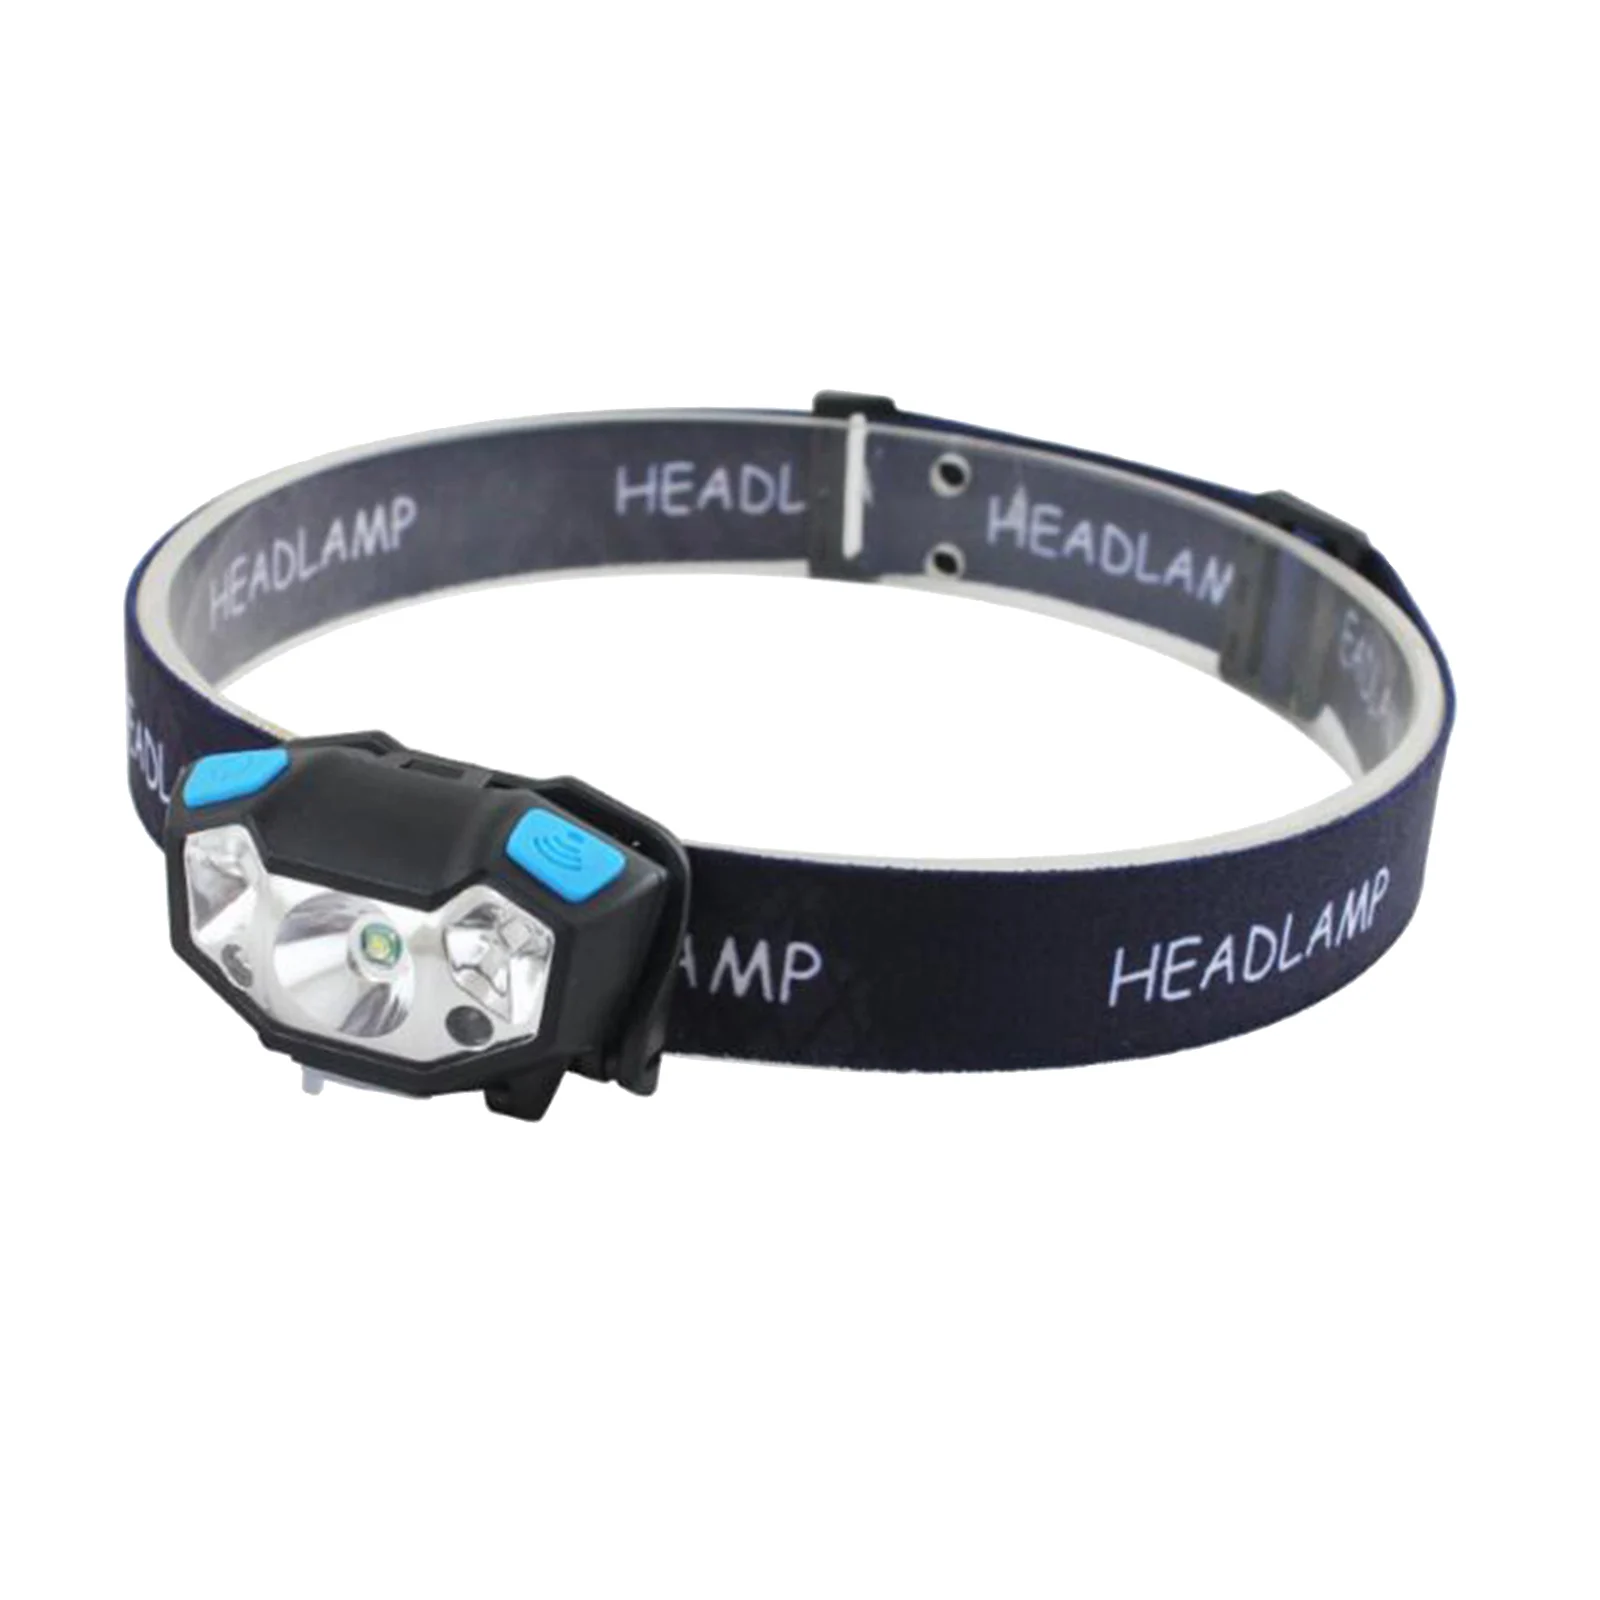 Headlight Rechargeable LED headlamp Head Light Torch Lamp Fishing Small Bright High Power Lantern Lamp for Adults Kids Outdoor